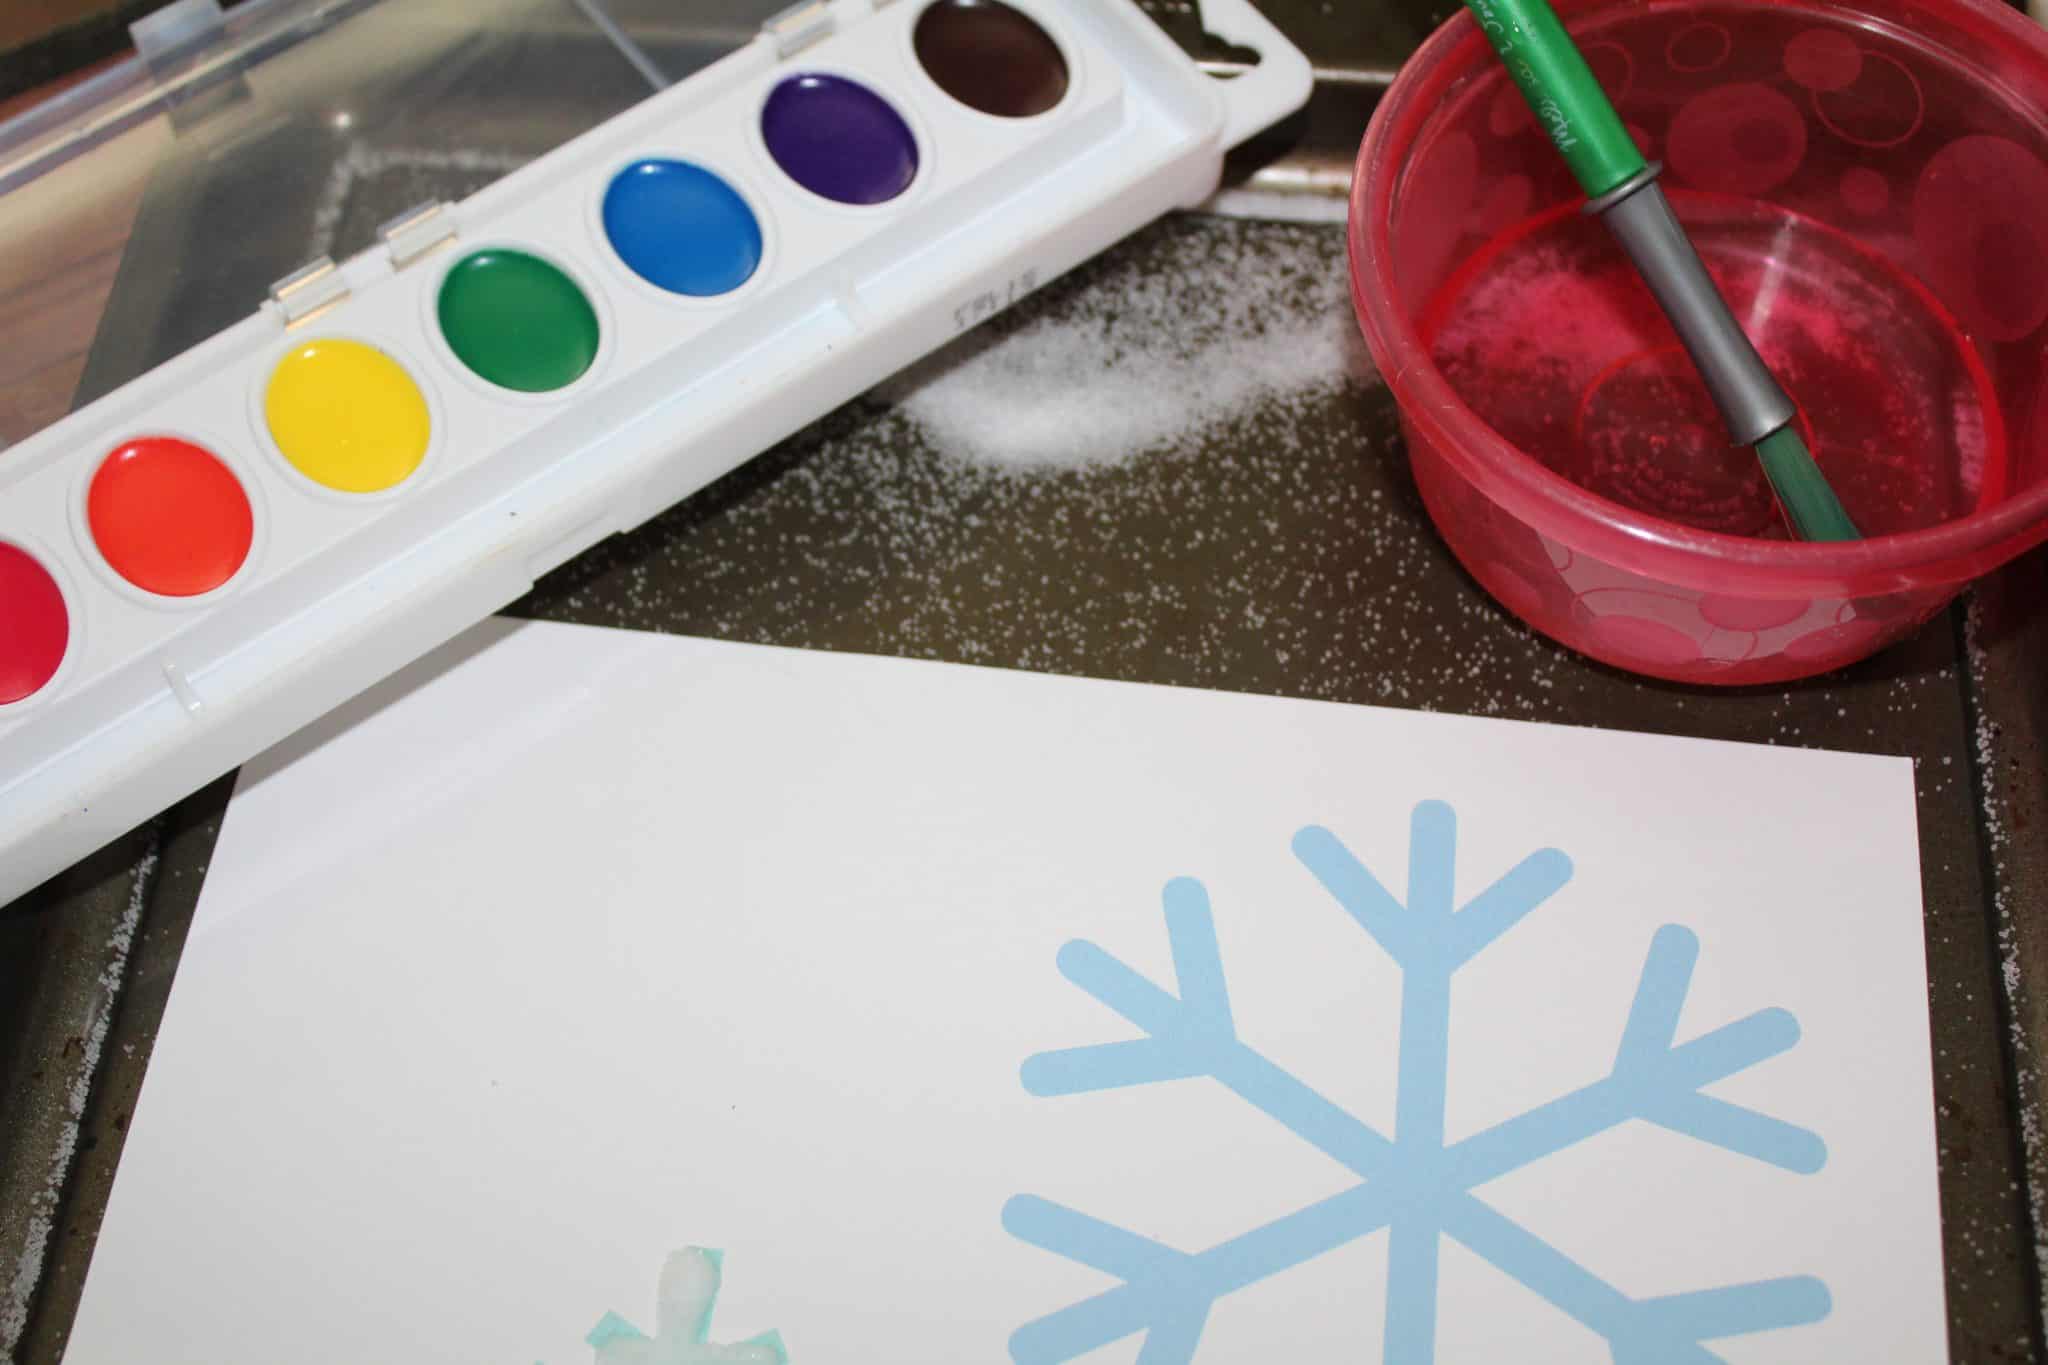 A pallet of water colors and a paint brush sitting next to a sheet with snowflakes templates